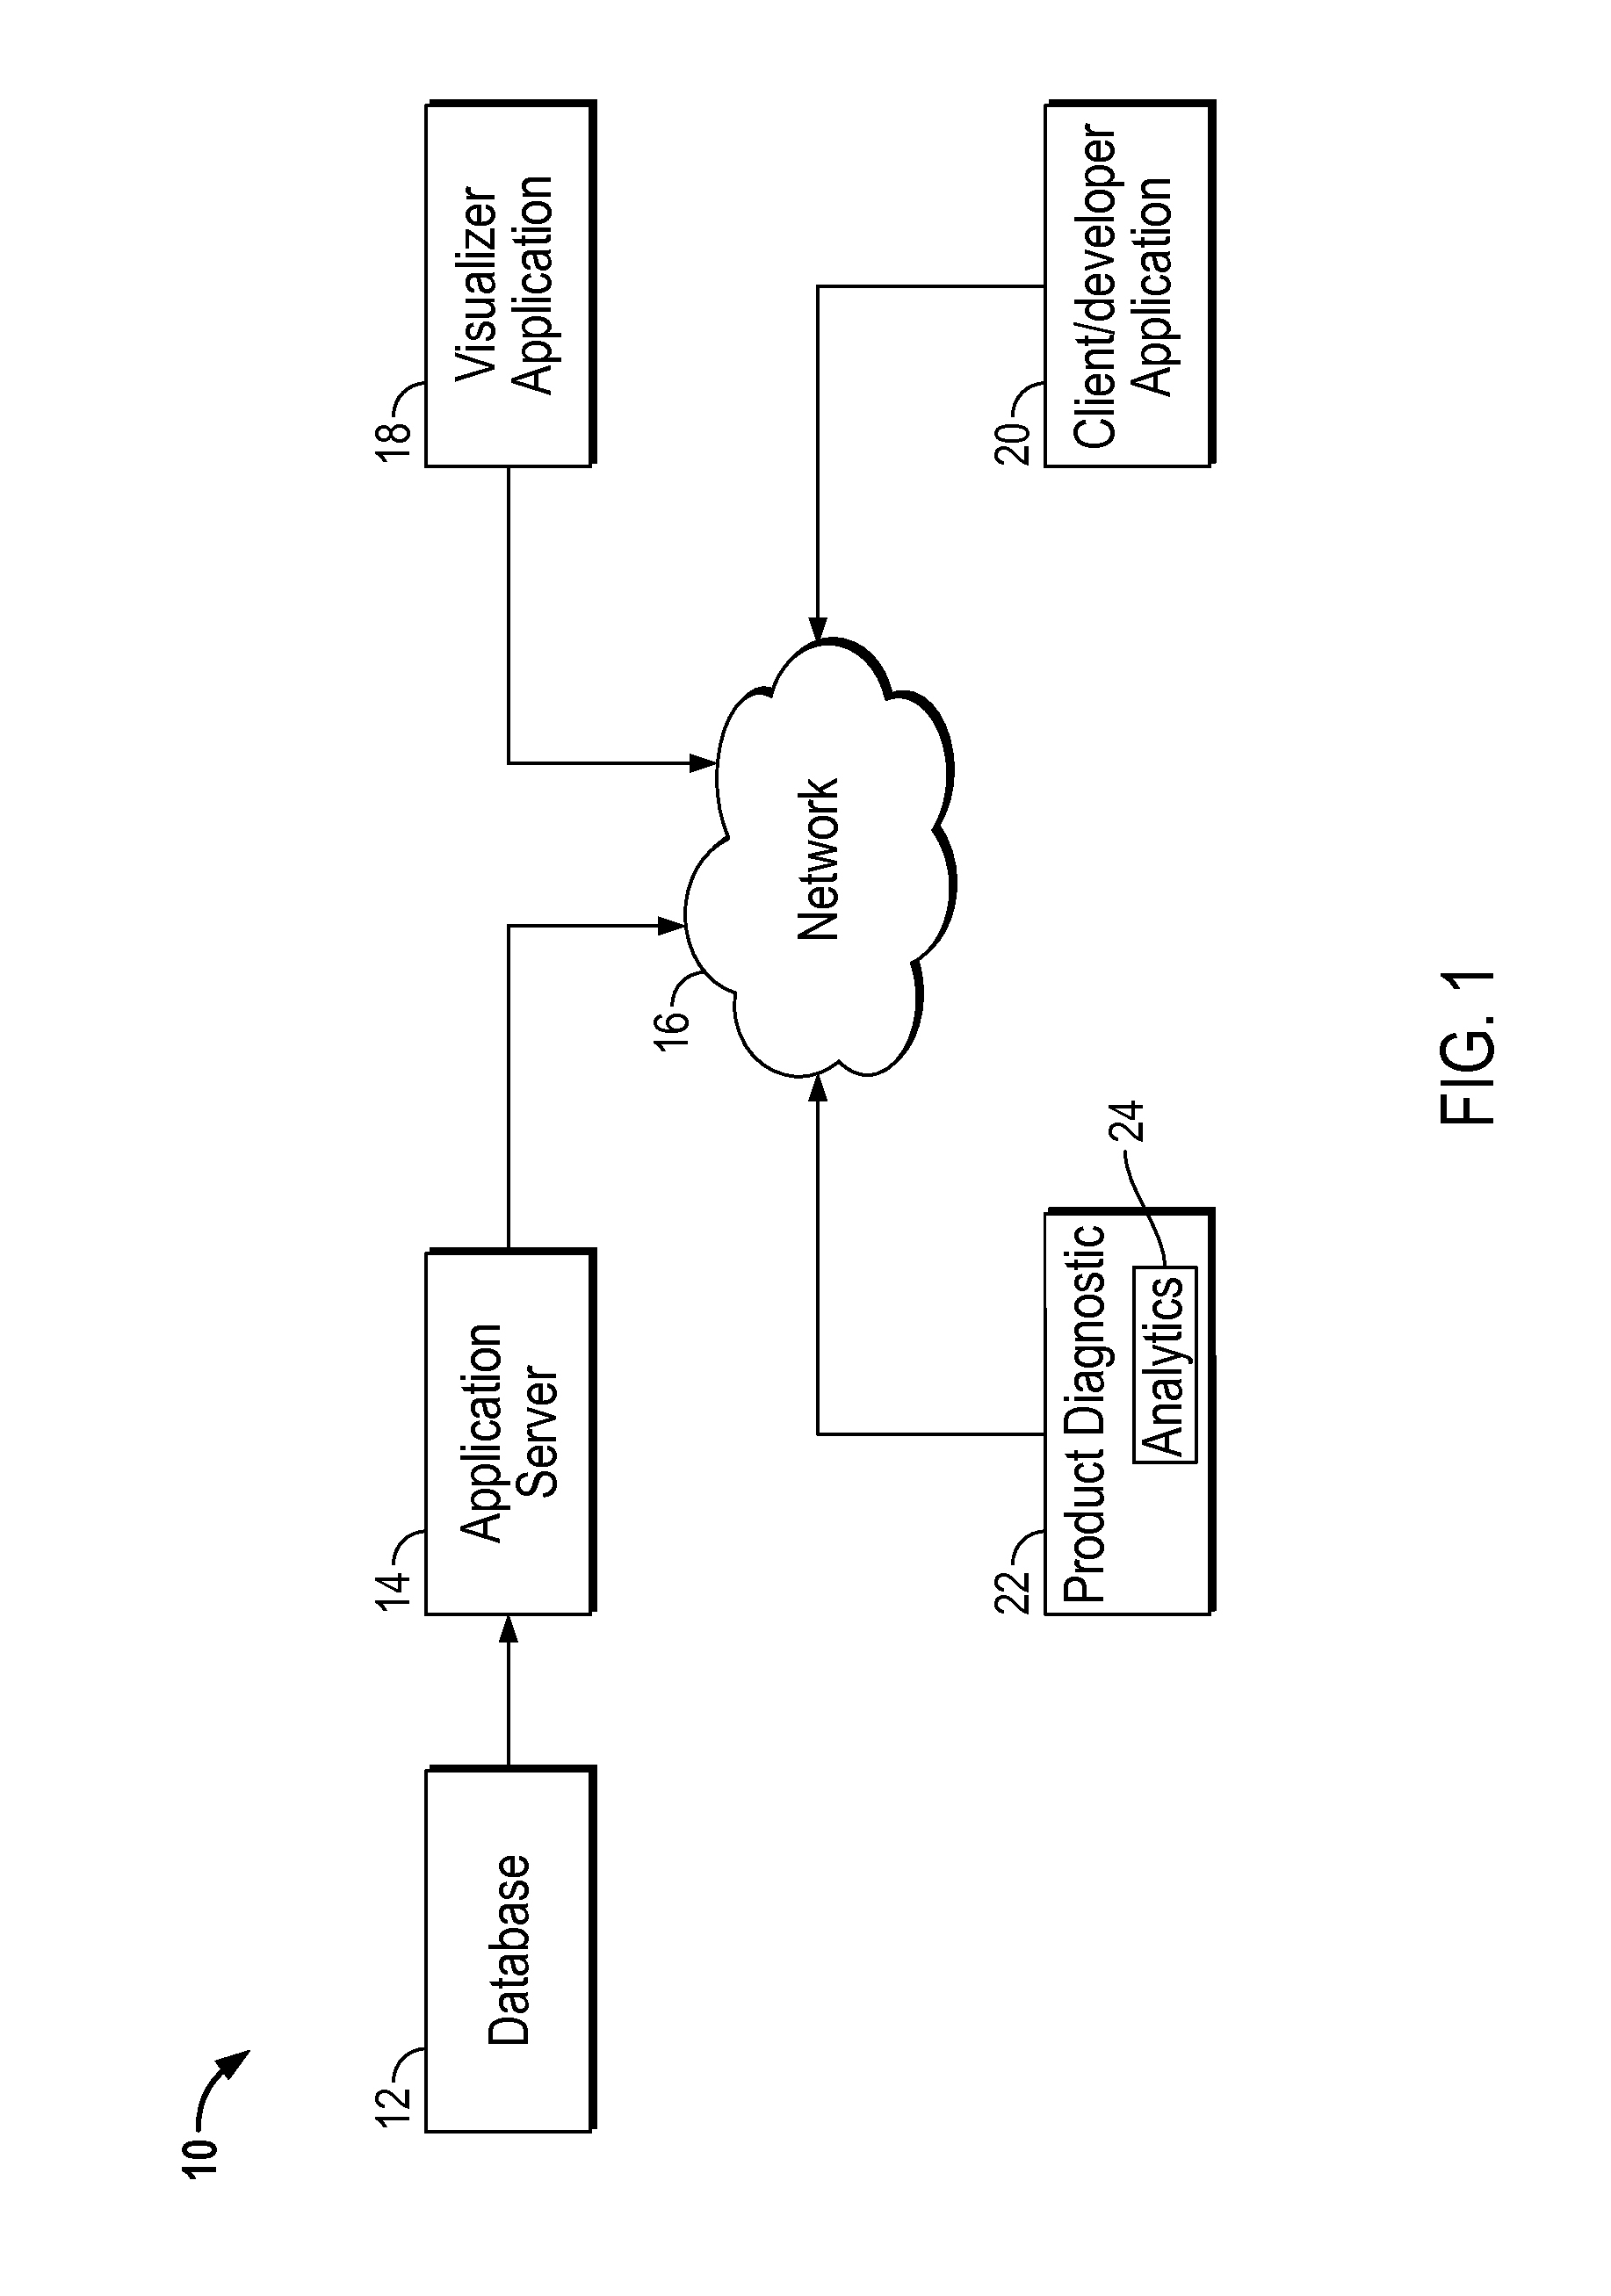 System and method for monitoring and reporting data in api processing systems